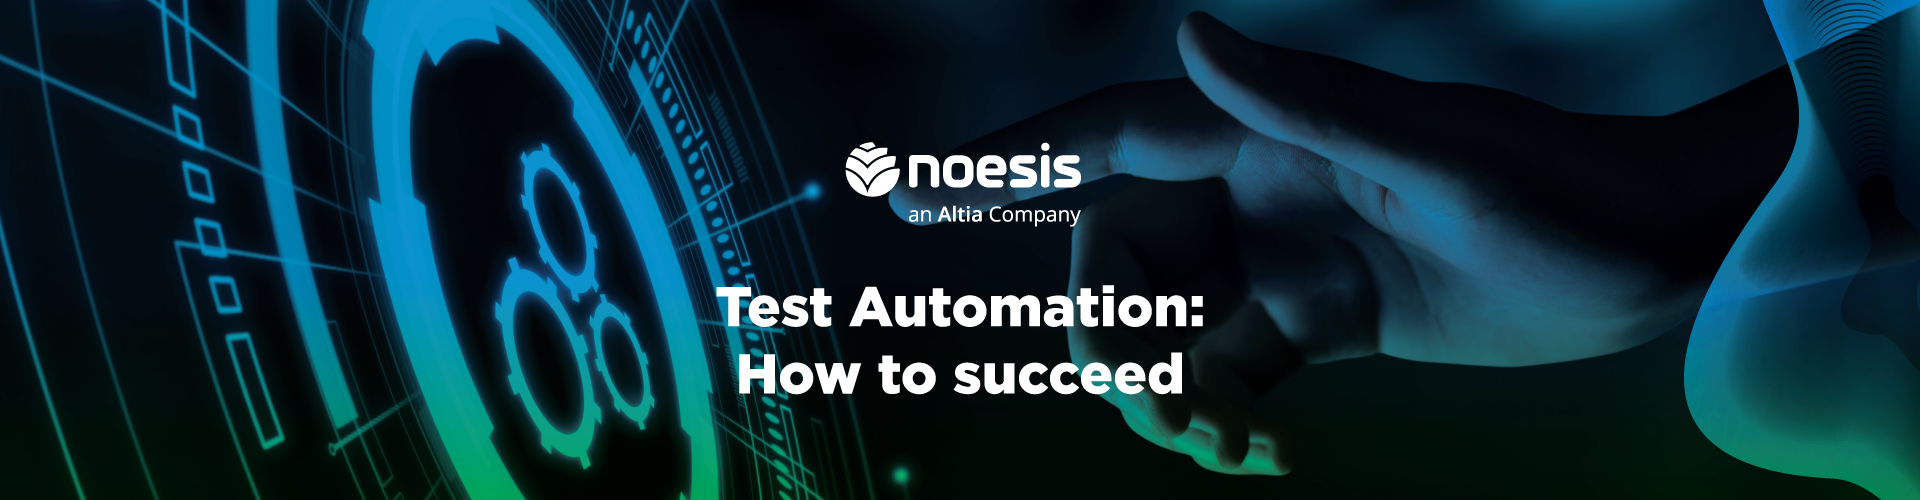 Webinar Test Automation How to Succeed